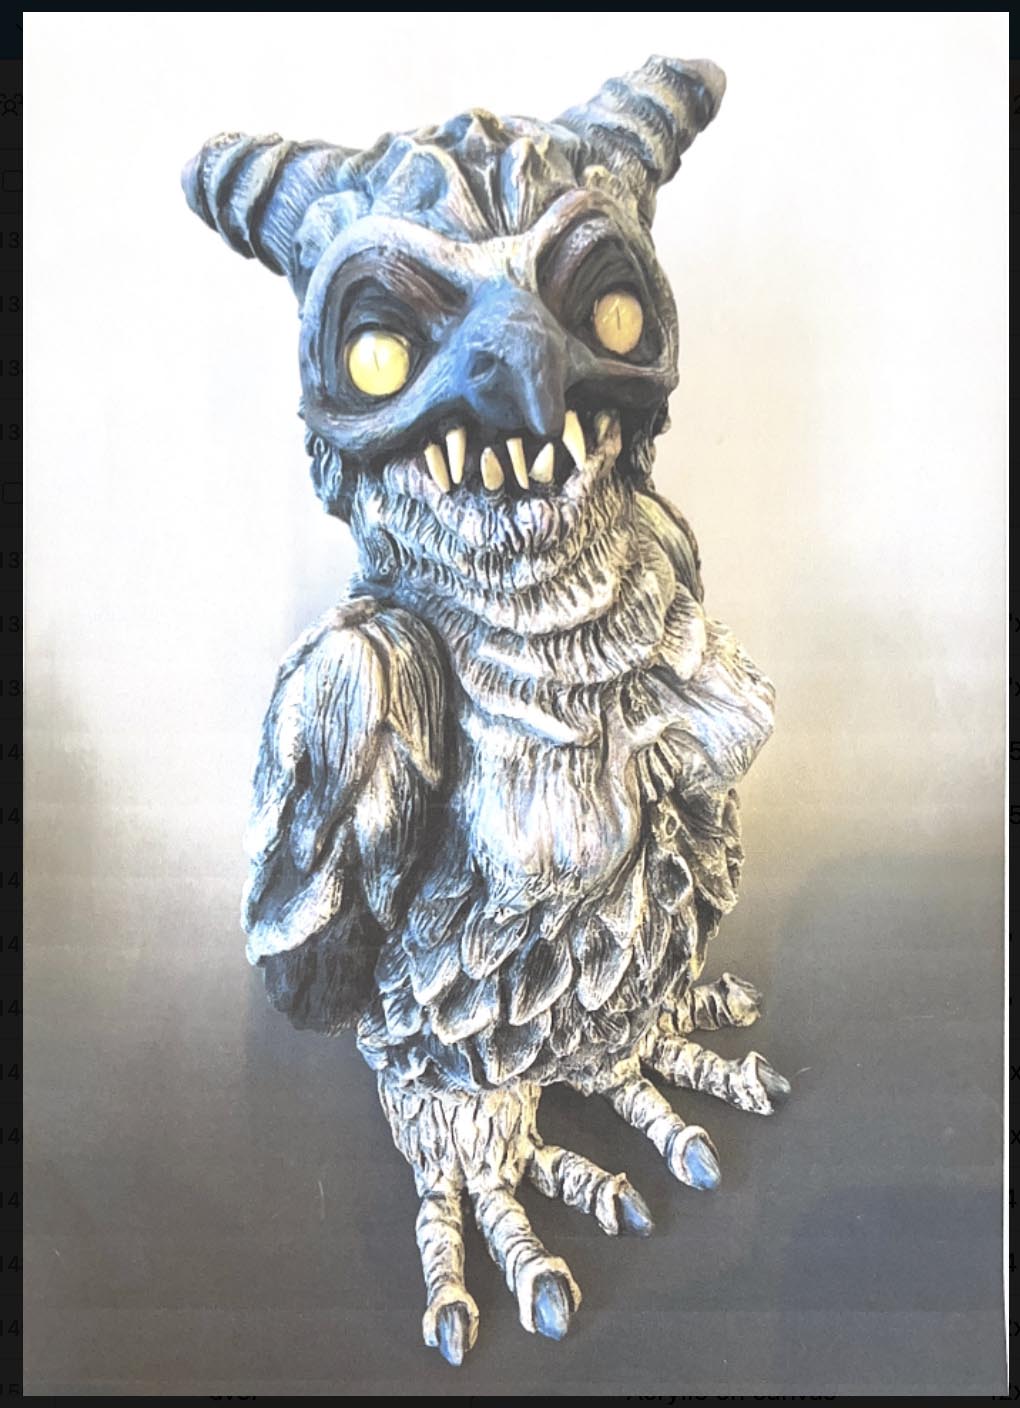 An owl-like creature with glowing yellow eyes and sharp dog-like teeth gazes menacingly at the viewer, the creature is a ceramic statue with intricate feather detailing and carefully sculpted appendages. The piece has a mystical, monster-like quality.